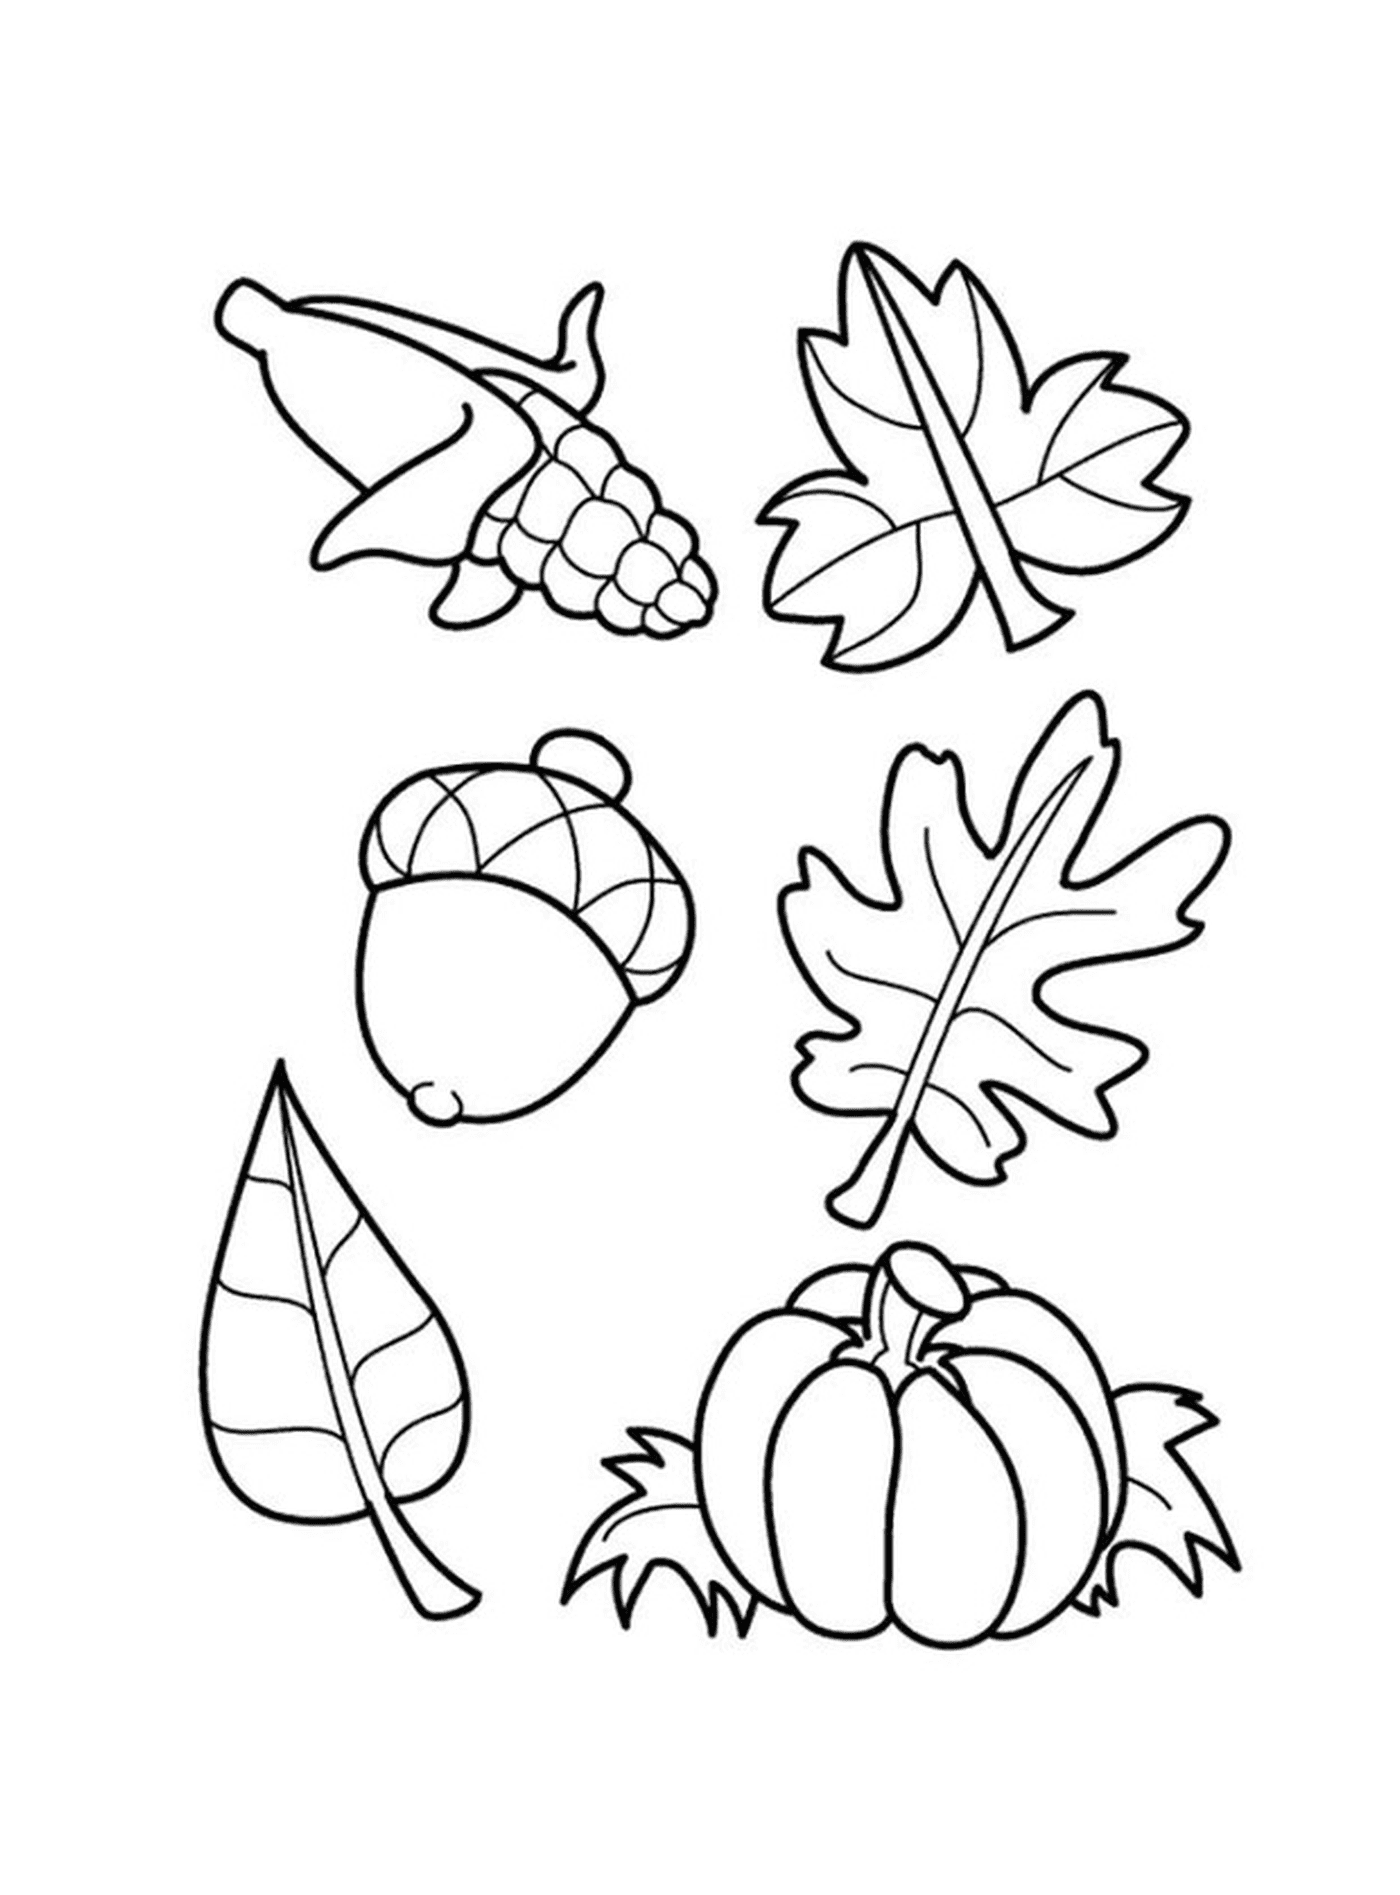  Different types of leaves 